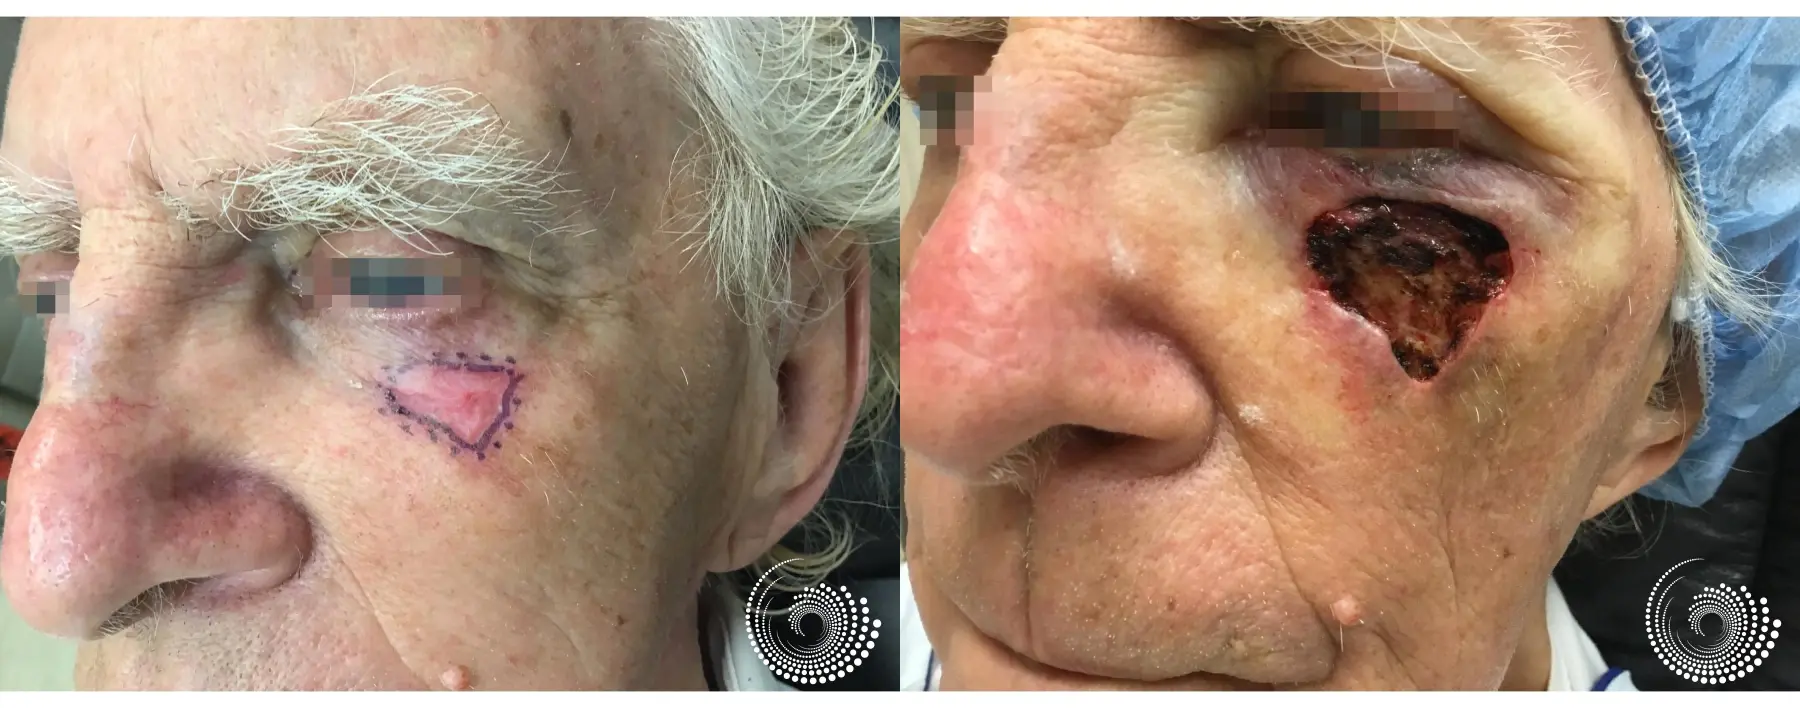 Basal Cell skin cancer under eye Mohs surgery - Before and After 2